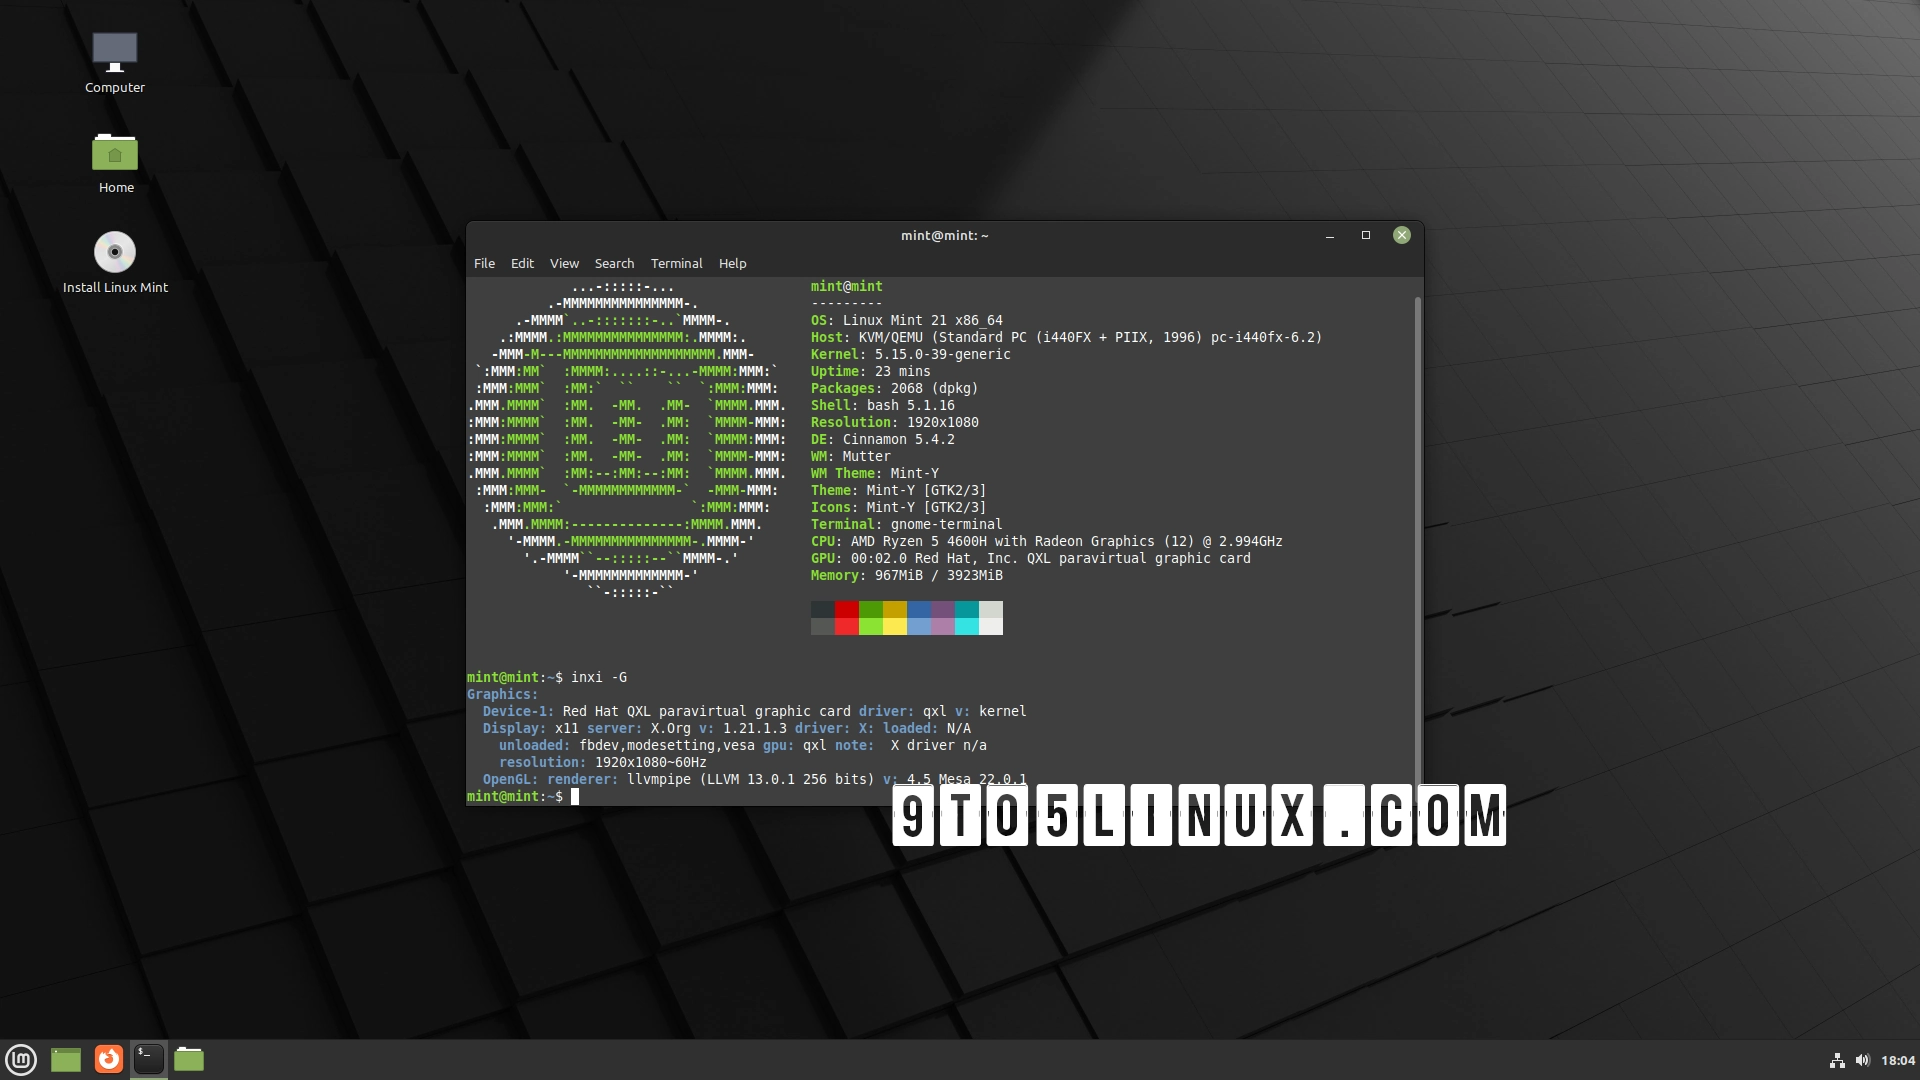 Linux Mint 21 Beta Is Now Available for Download, Here’s a First Look